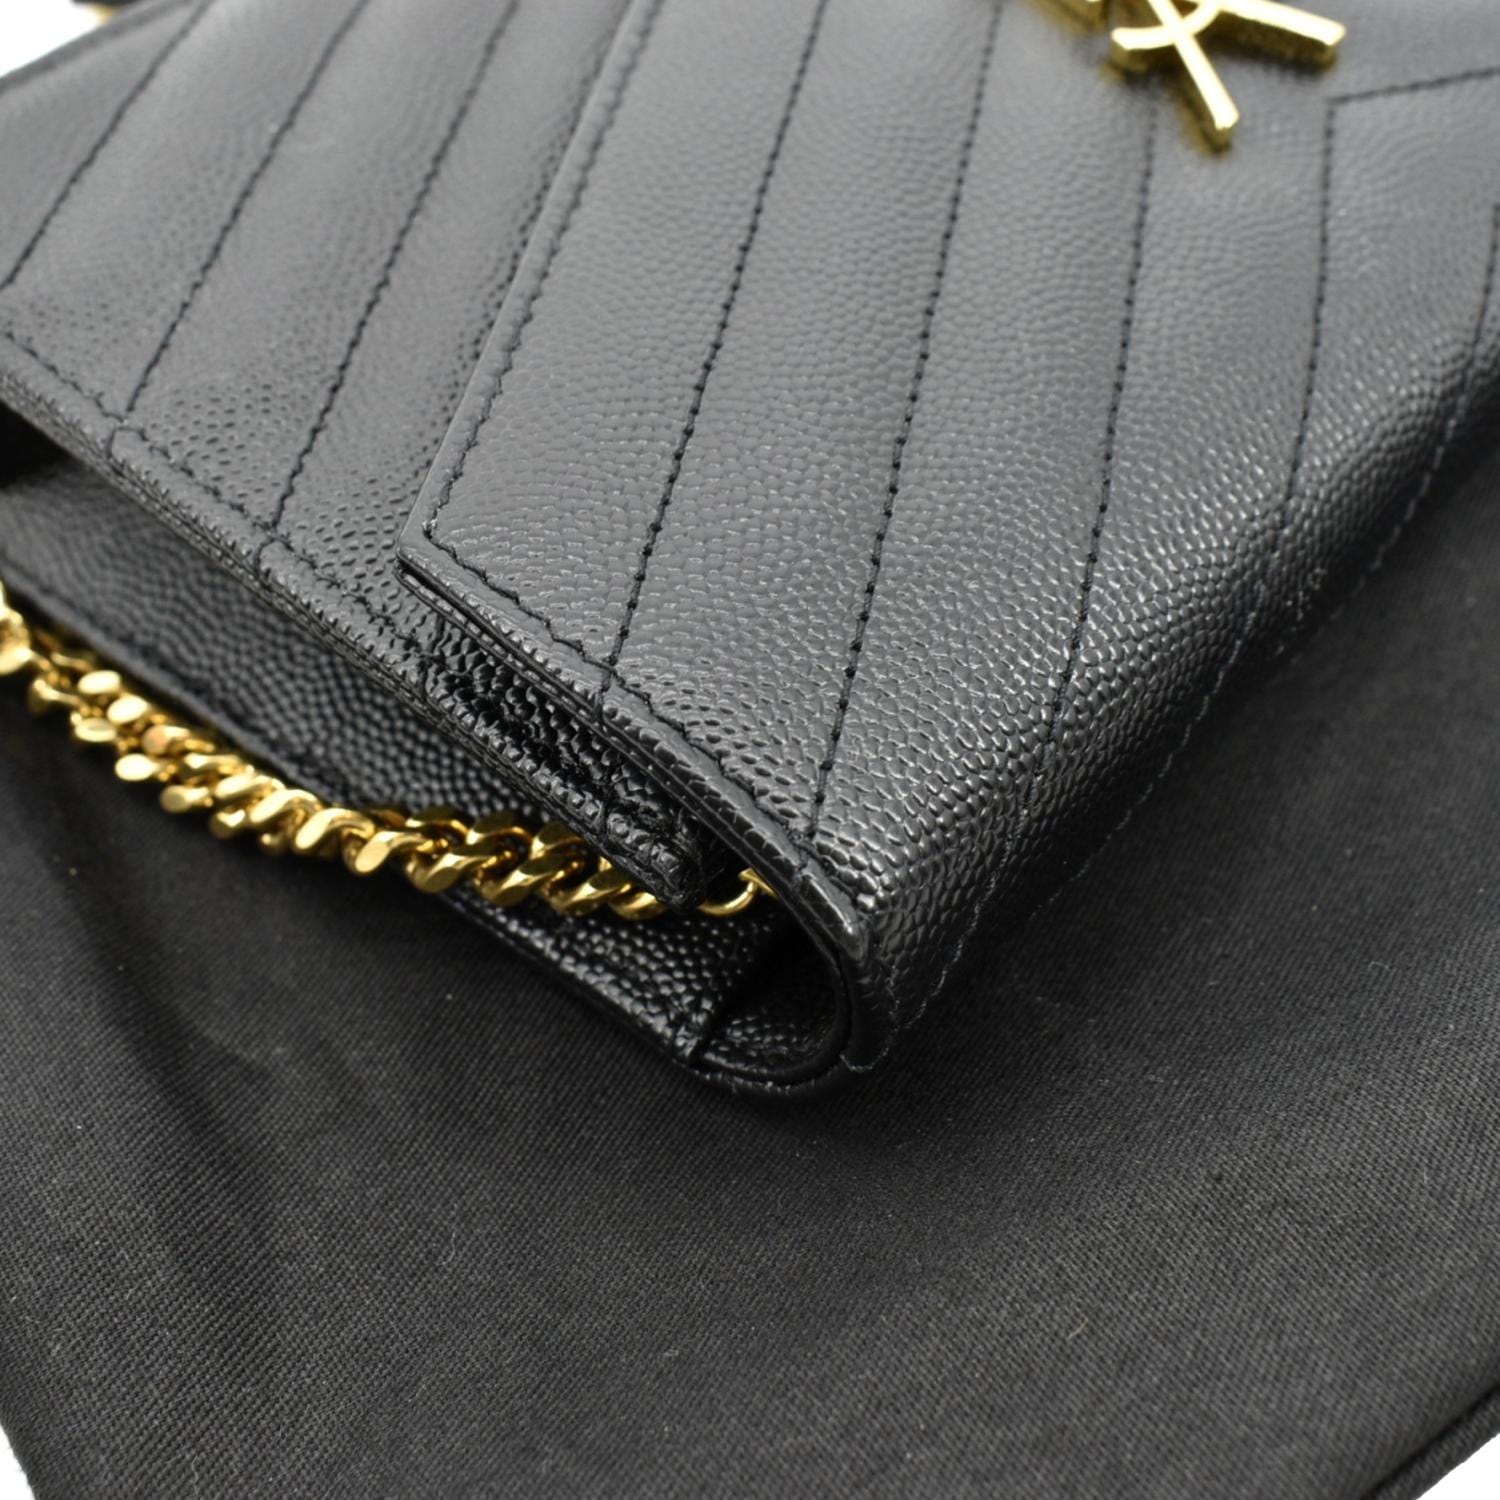 ysl black bag with silver chain